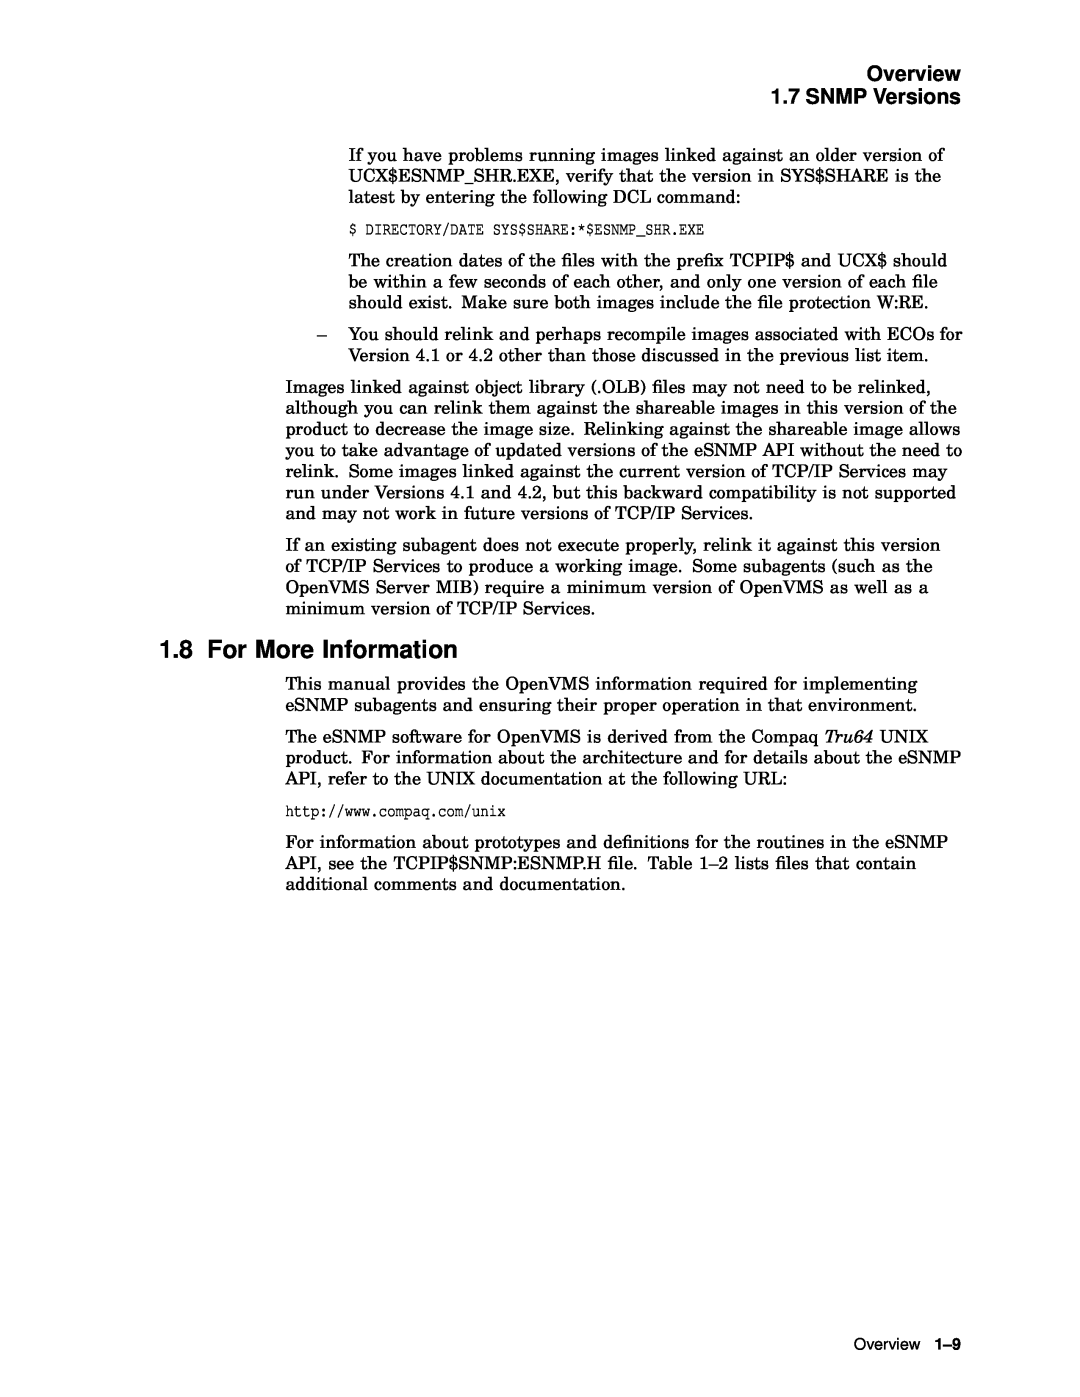 Compaq AAR04BCTE manual For More Information, Overview 1.7 SNMP Versions 